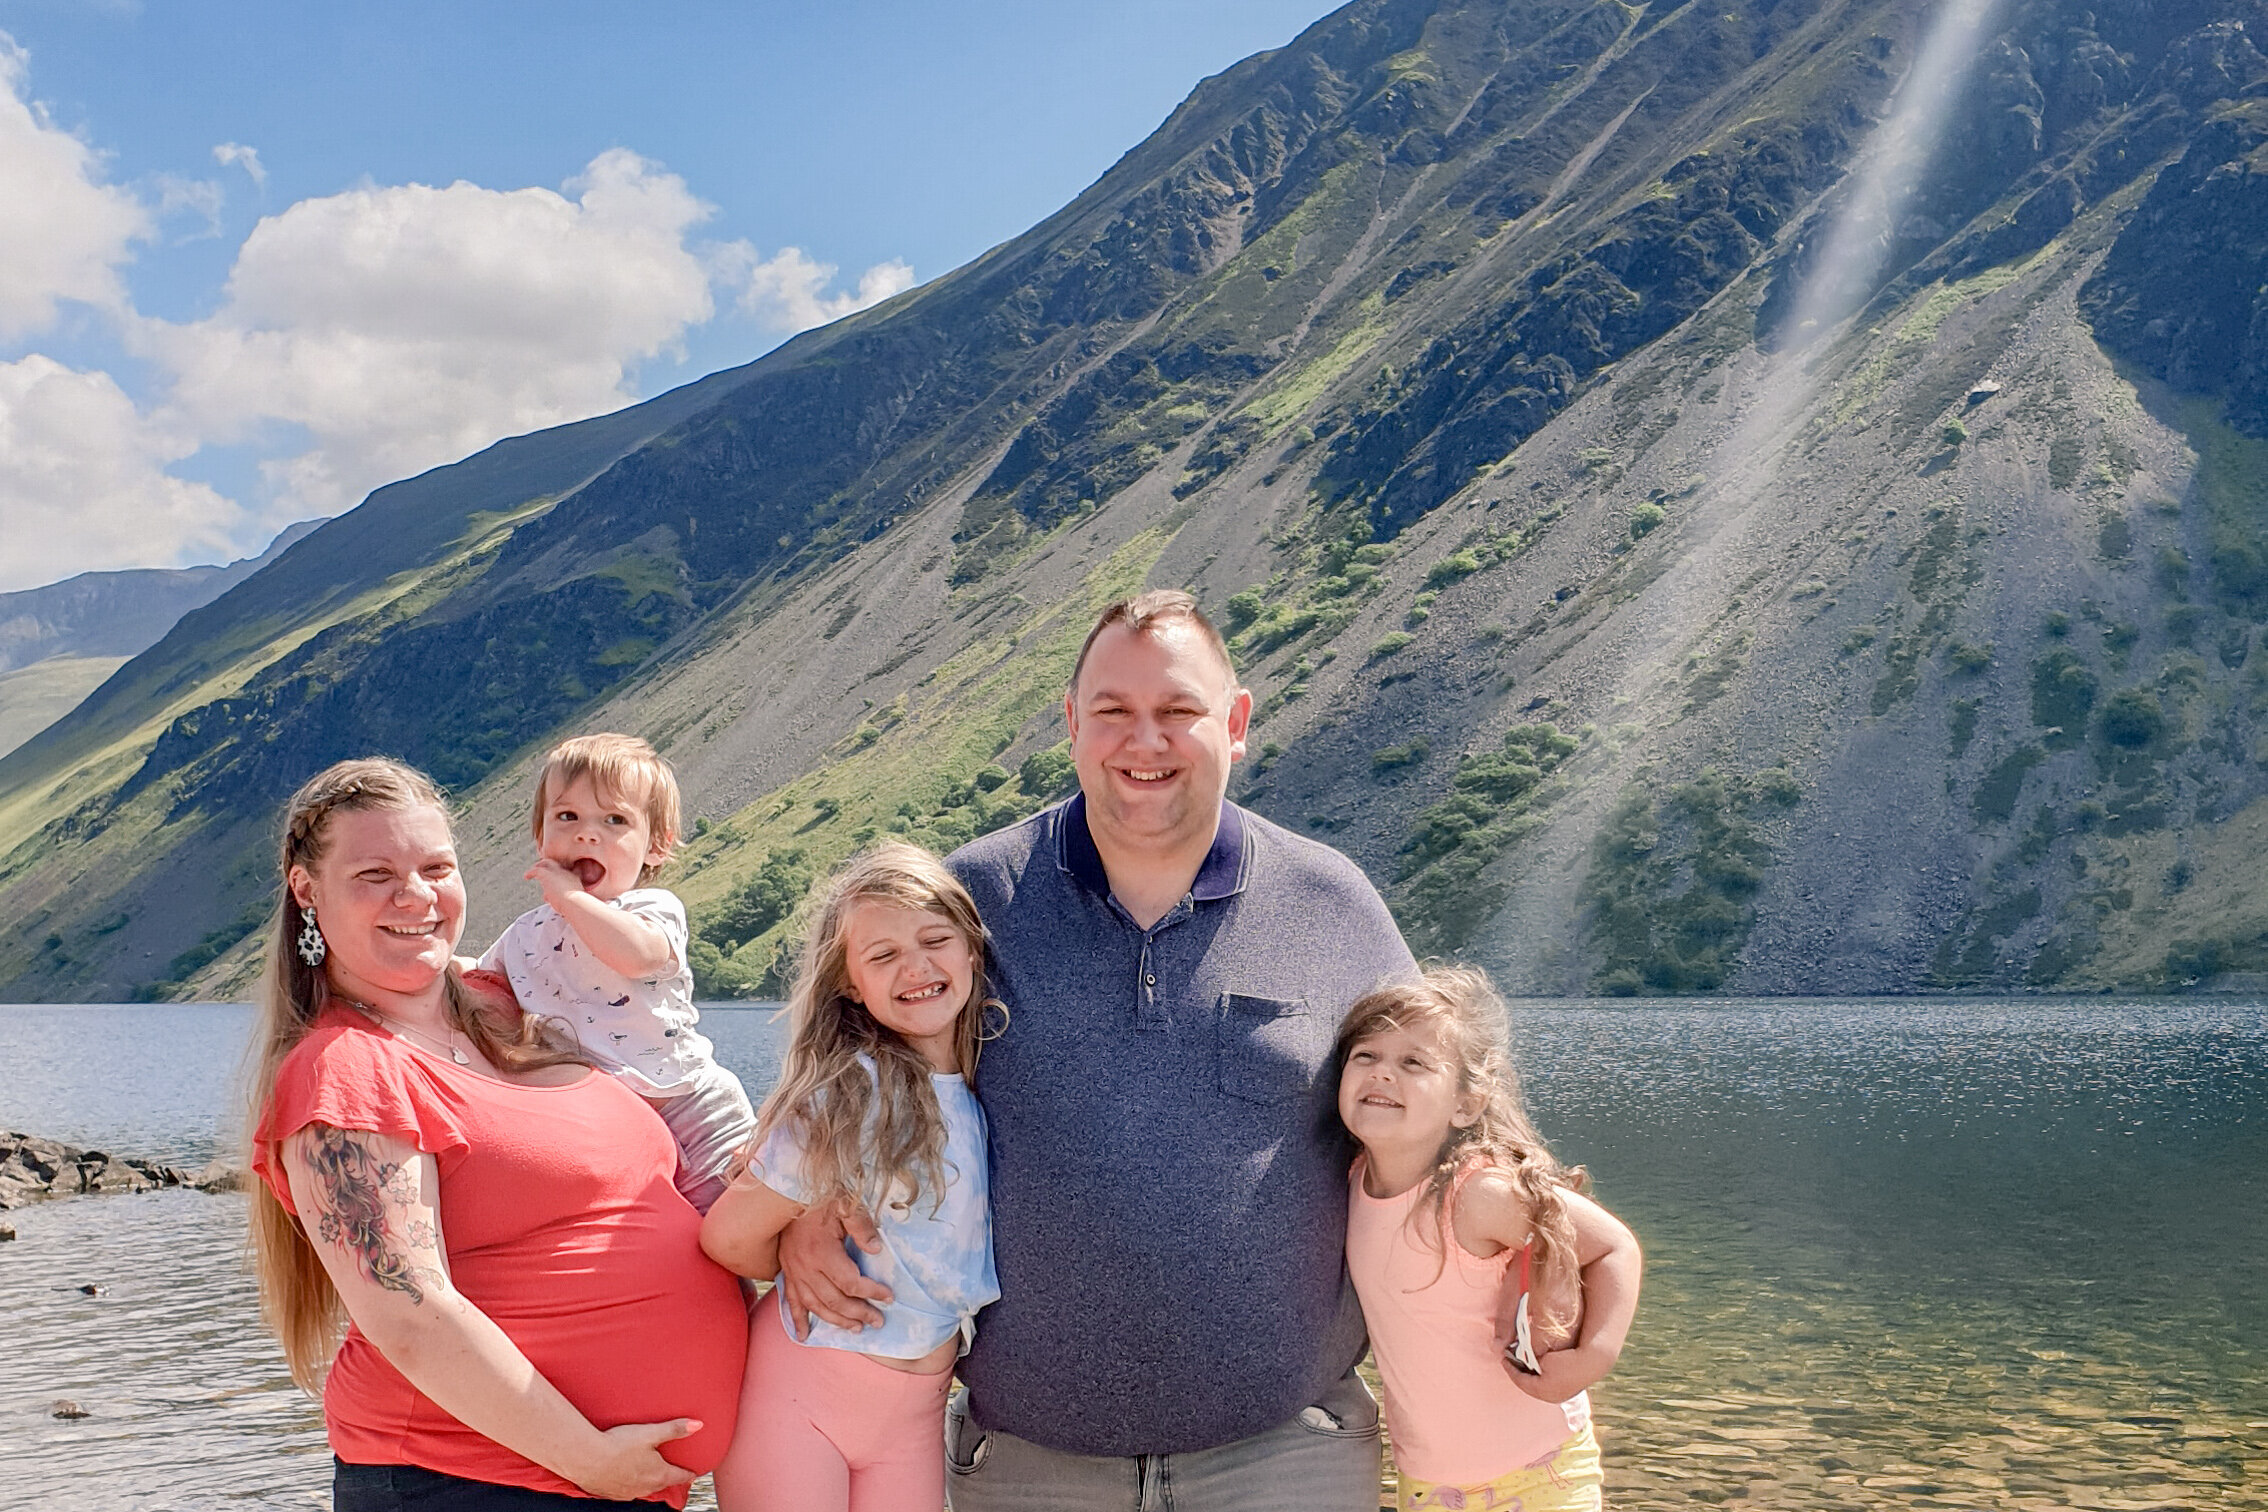 The Hassan family are on a grassy section of Wast Water lakeshore with Wast Water and the Lakeland fells in the background.